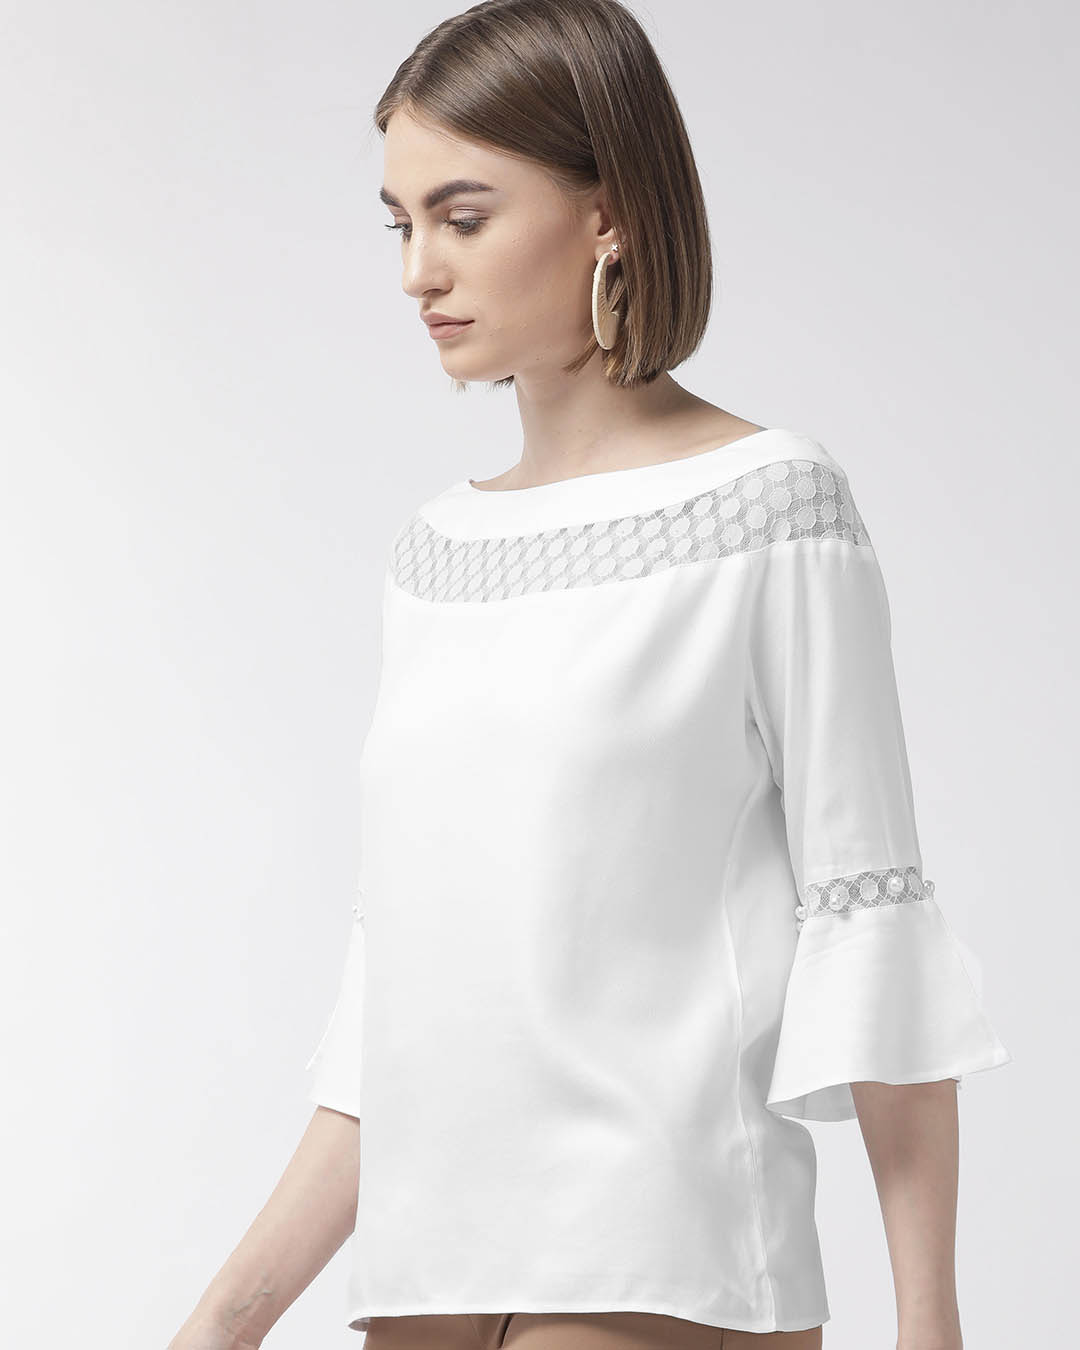 Shop Women's White Solid Top-Back